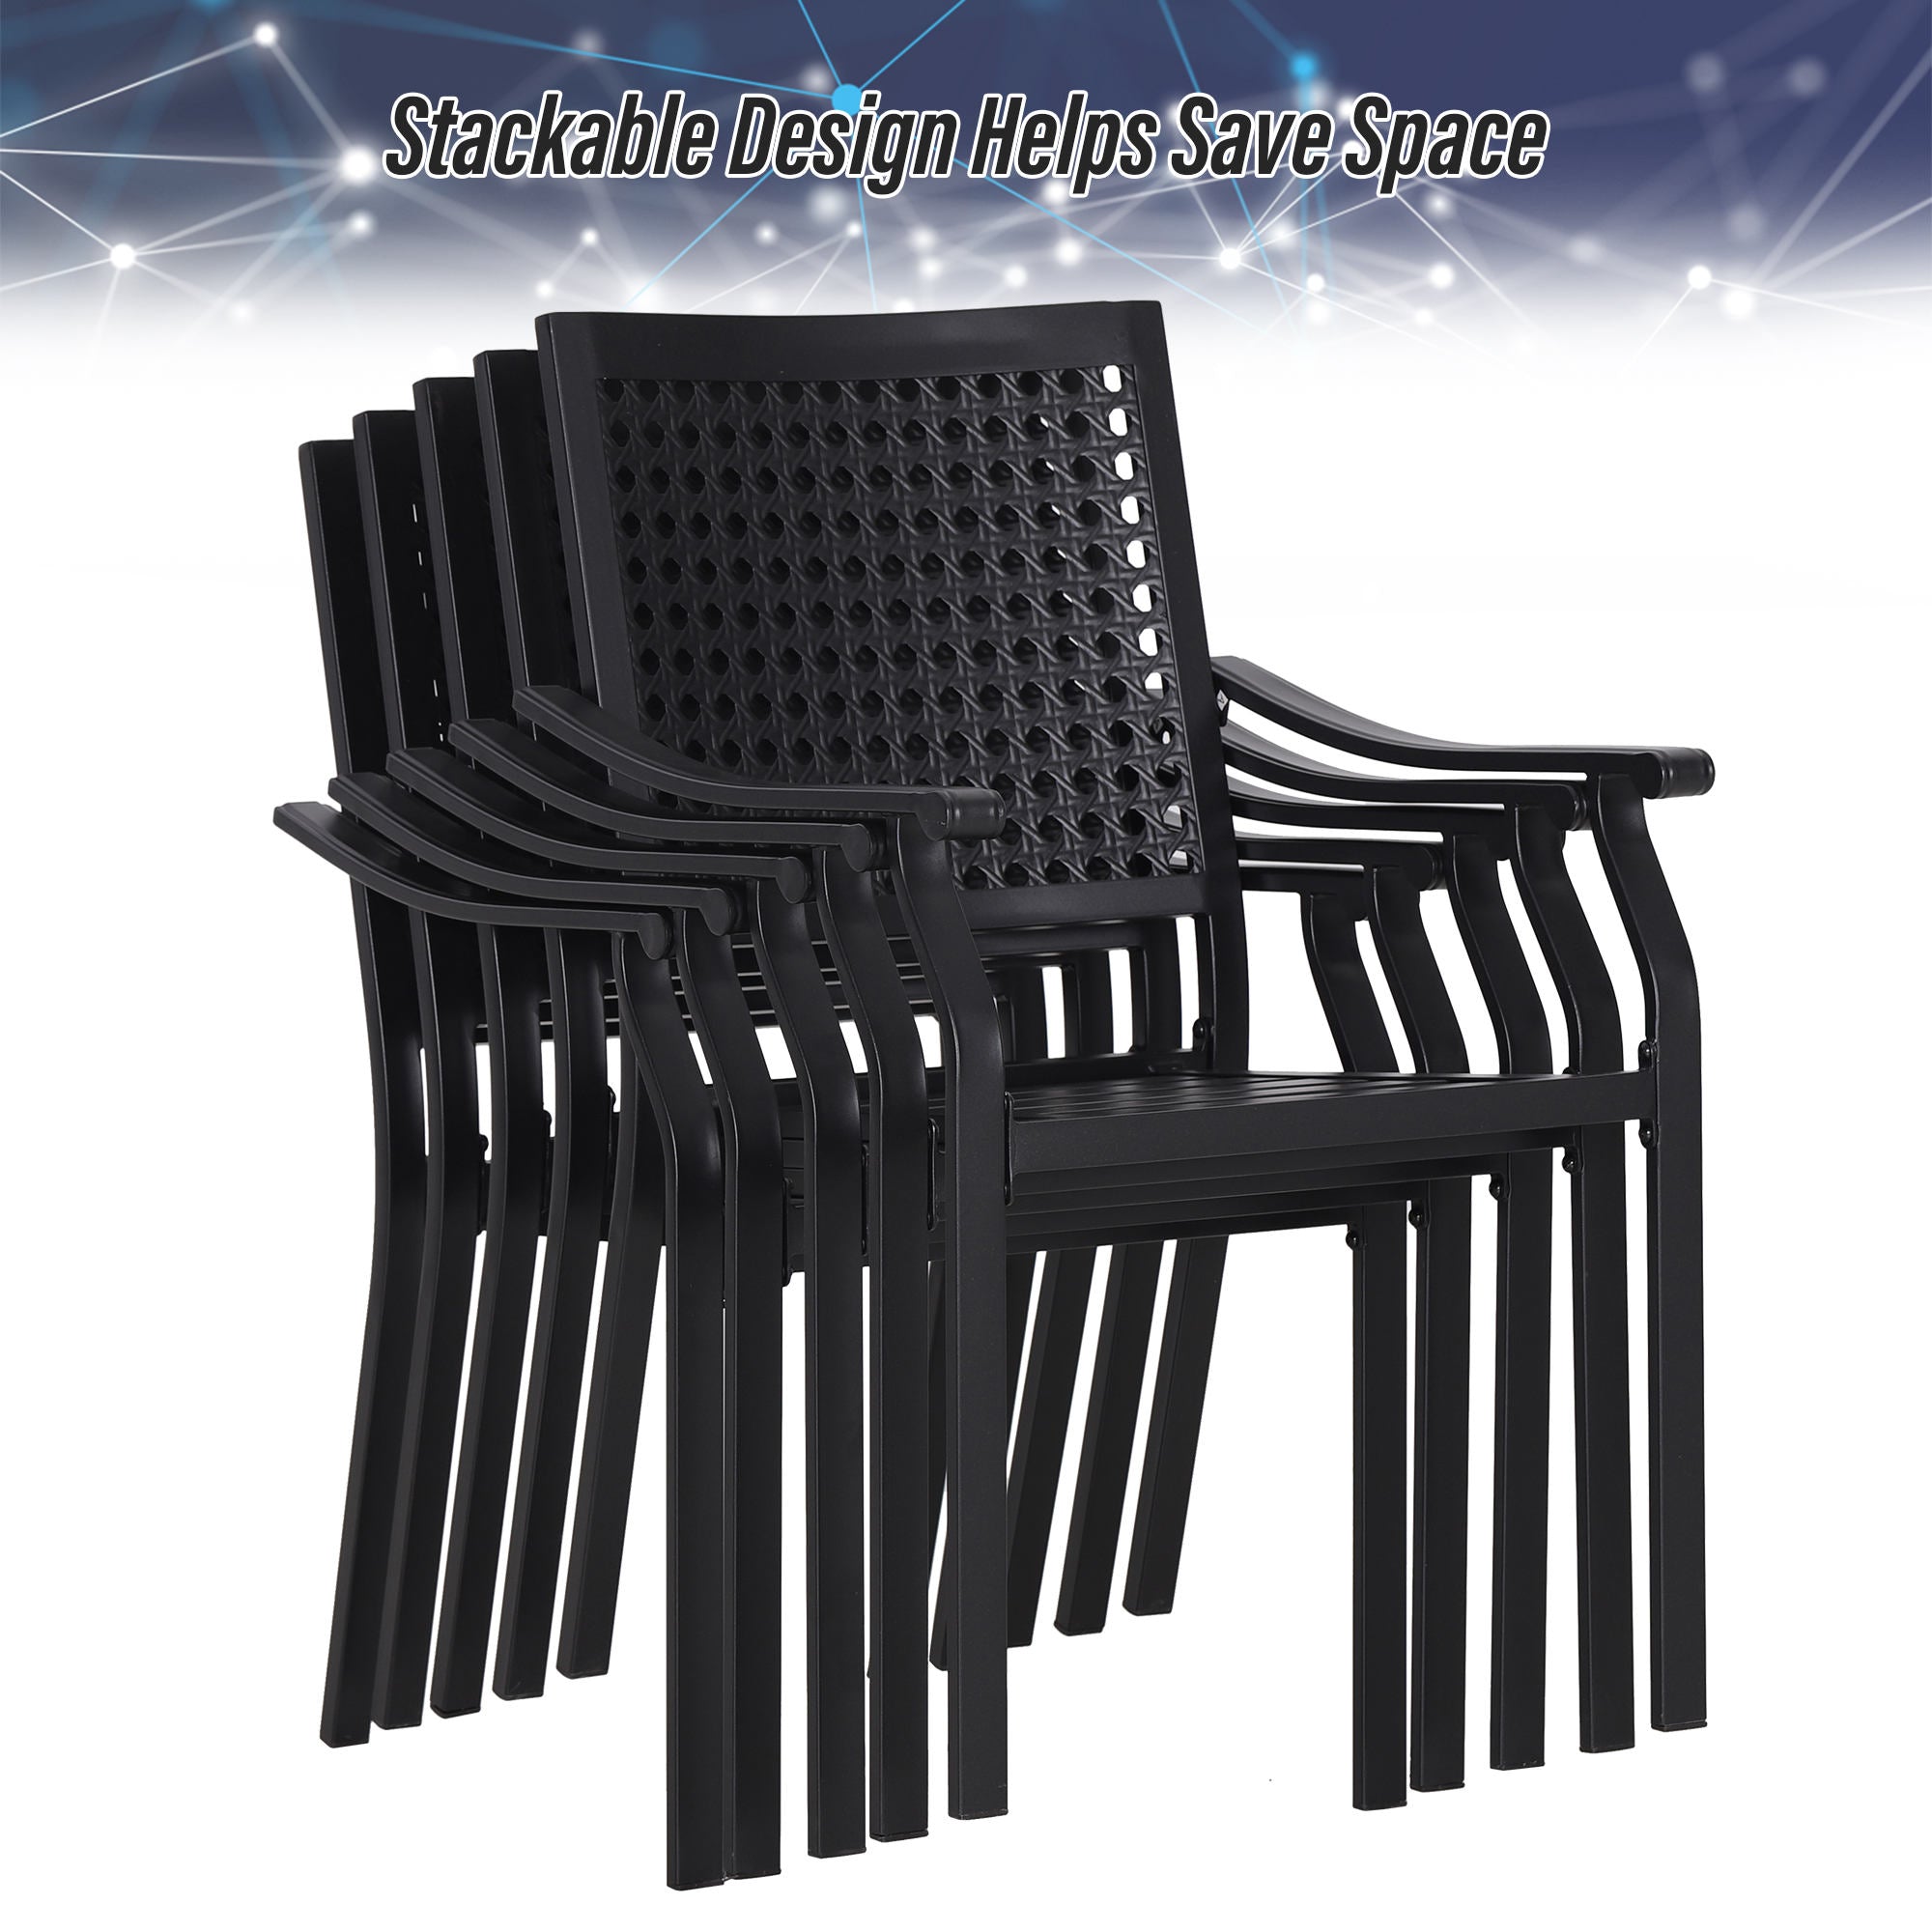 MFSTUDIO 9-Piece Patio Dining Set Large Square Table & Bull-eye-pattern Stackable Chairs